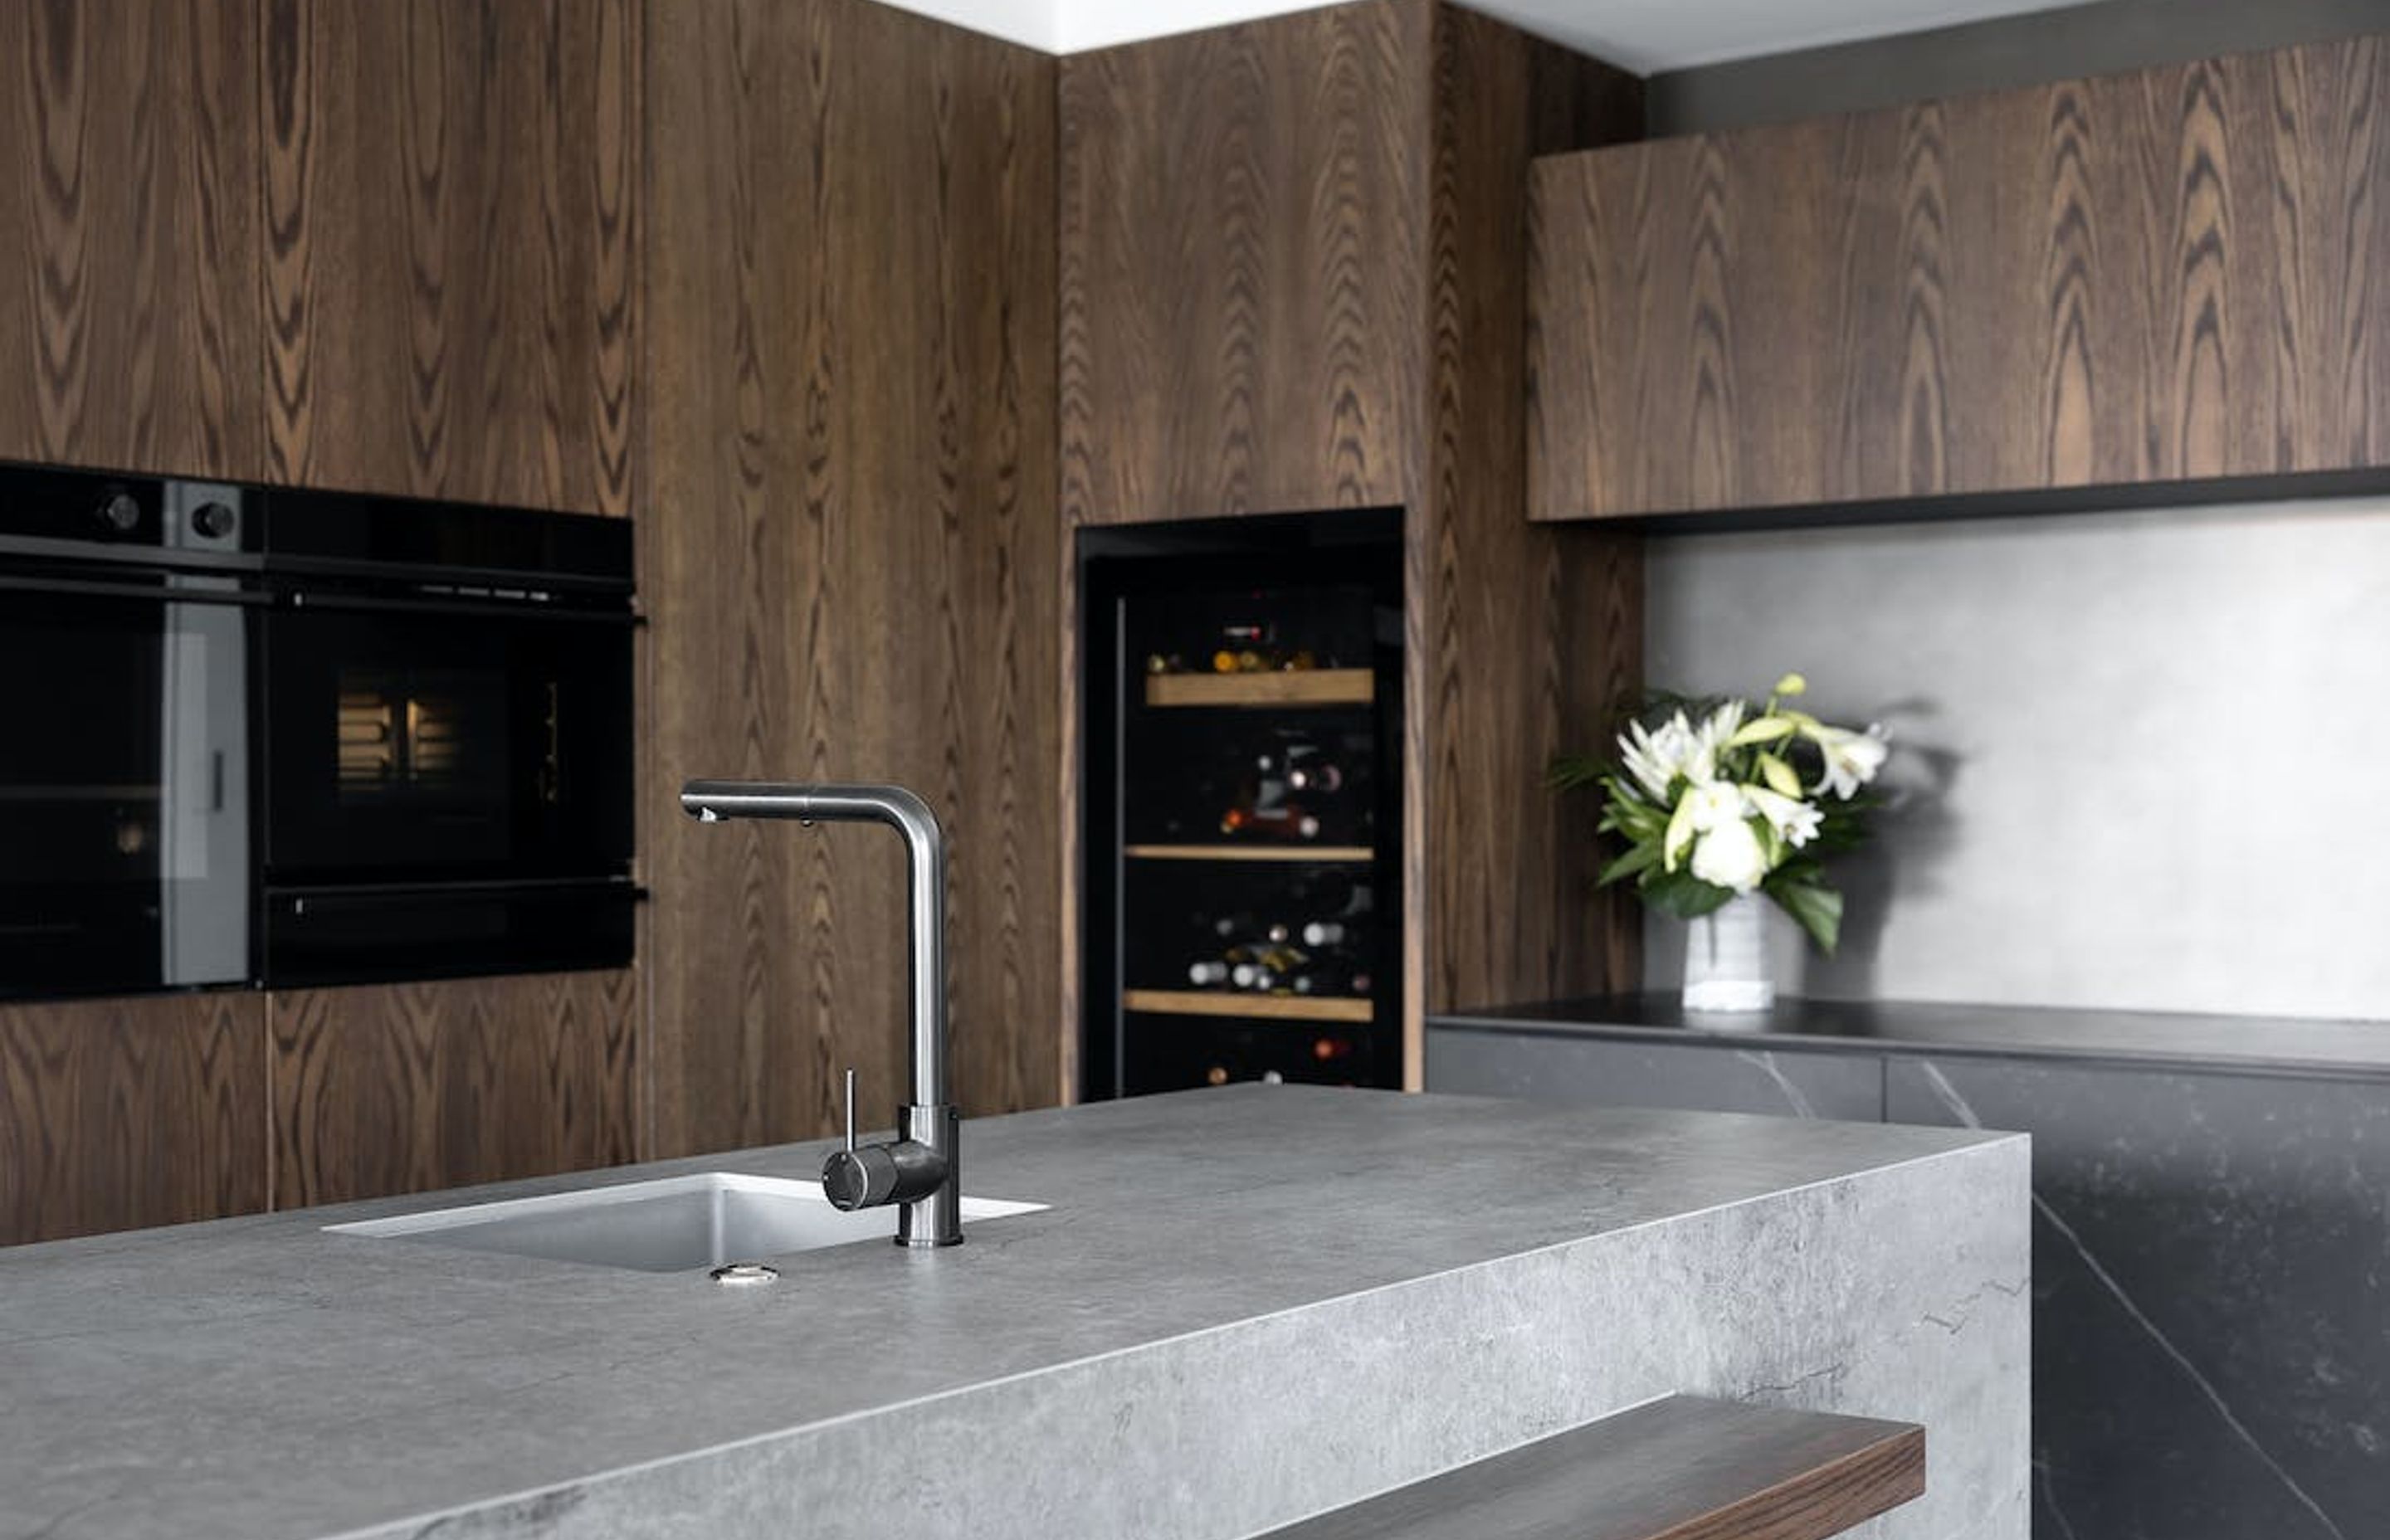 Two Dekton Colours To Match Wood In Kitchens &amp; Bathrooms